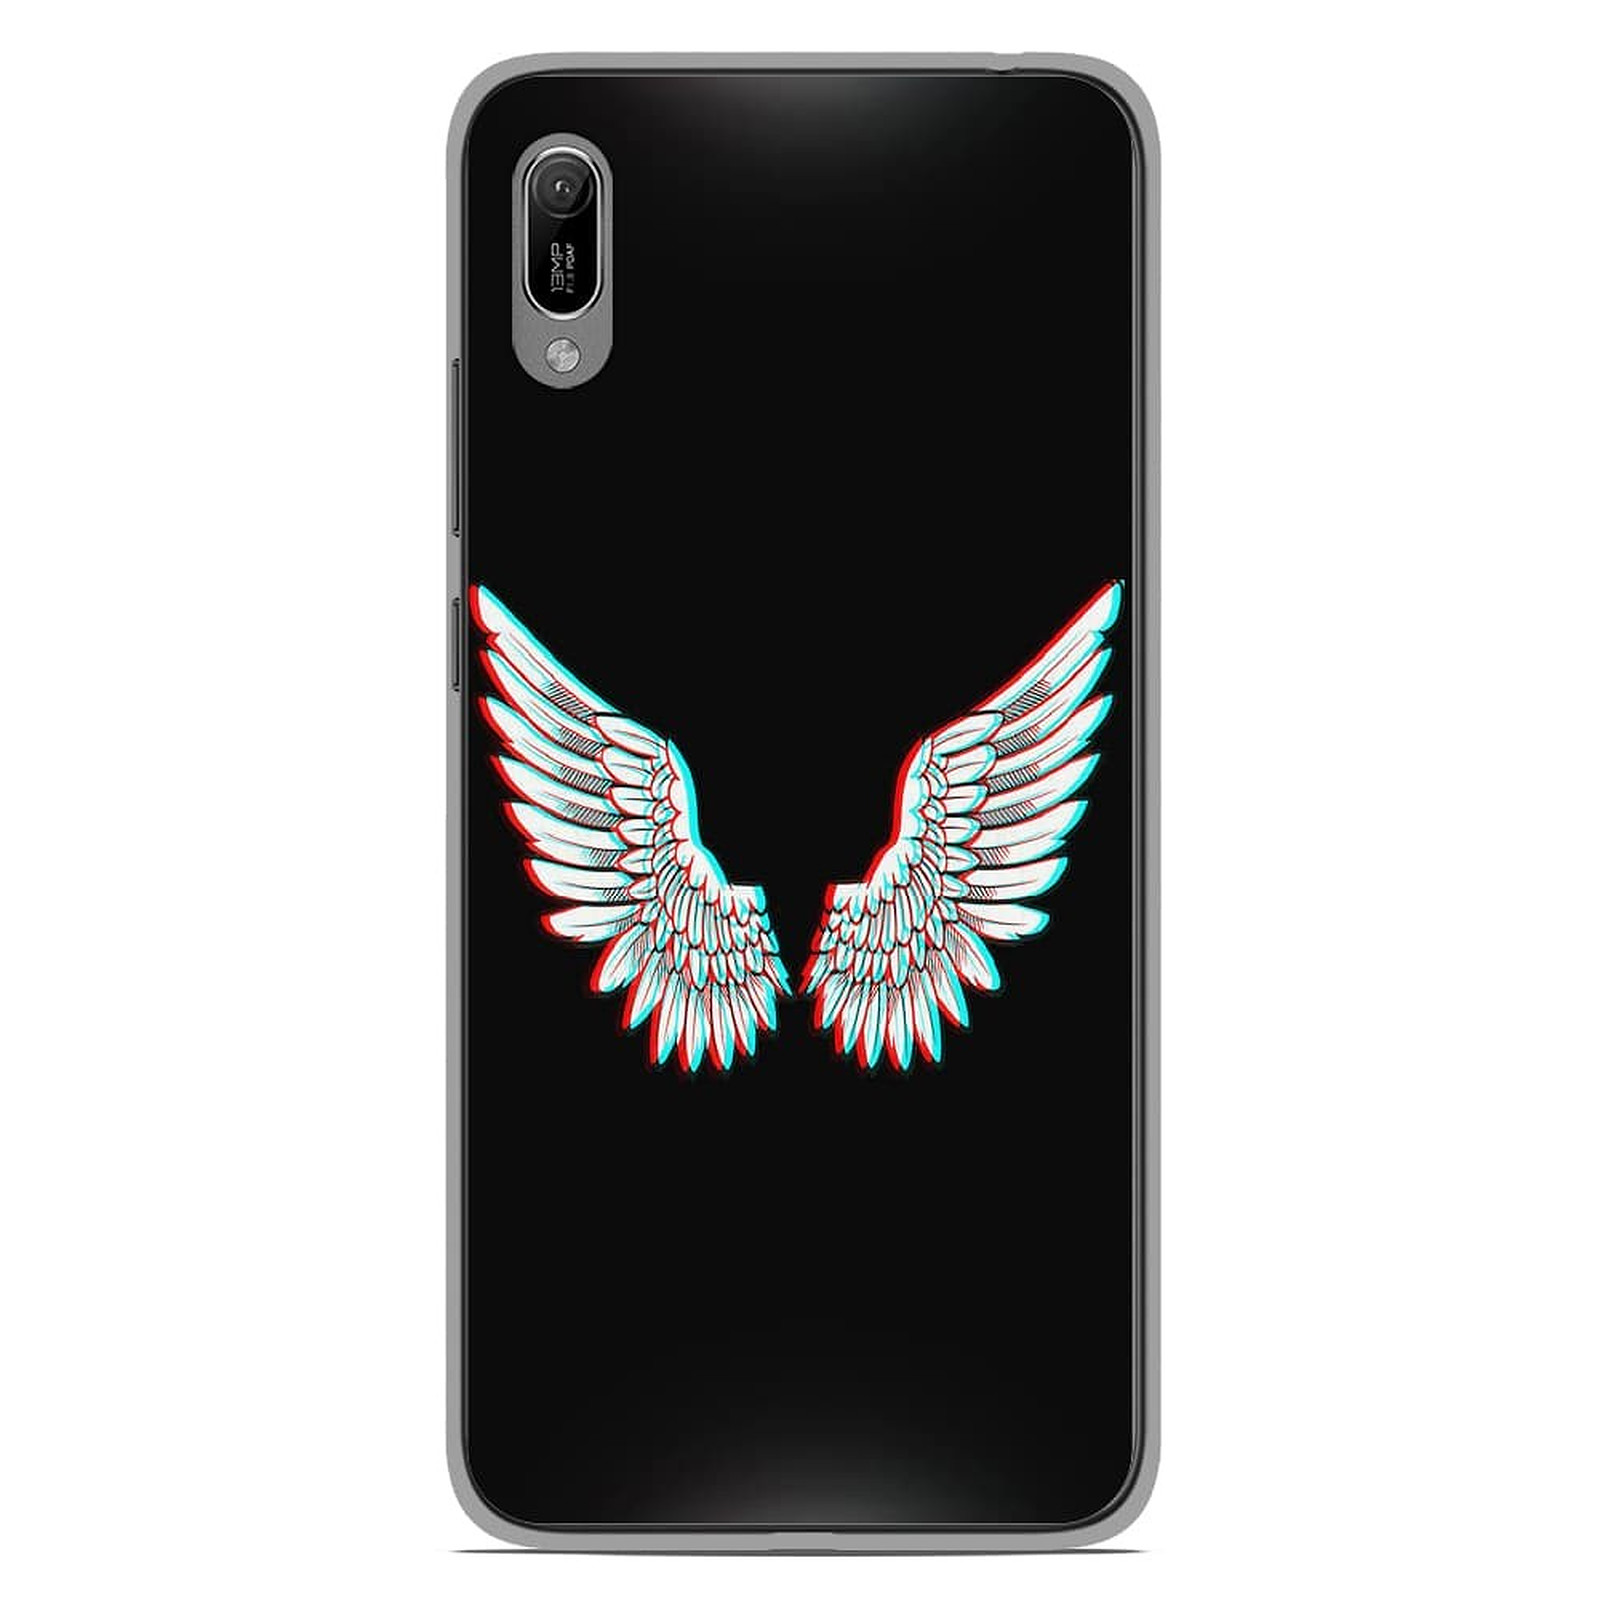 1001 Coques Coque silicone gel Huawei Y6 2019 motif Ailes d'Ange - Coque telephone 1001Coques